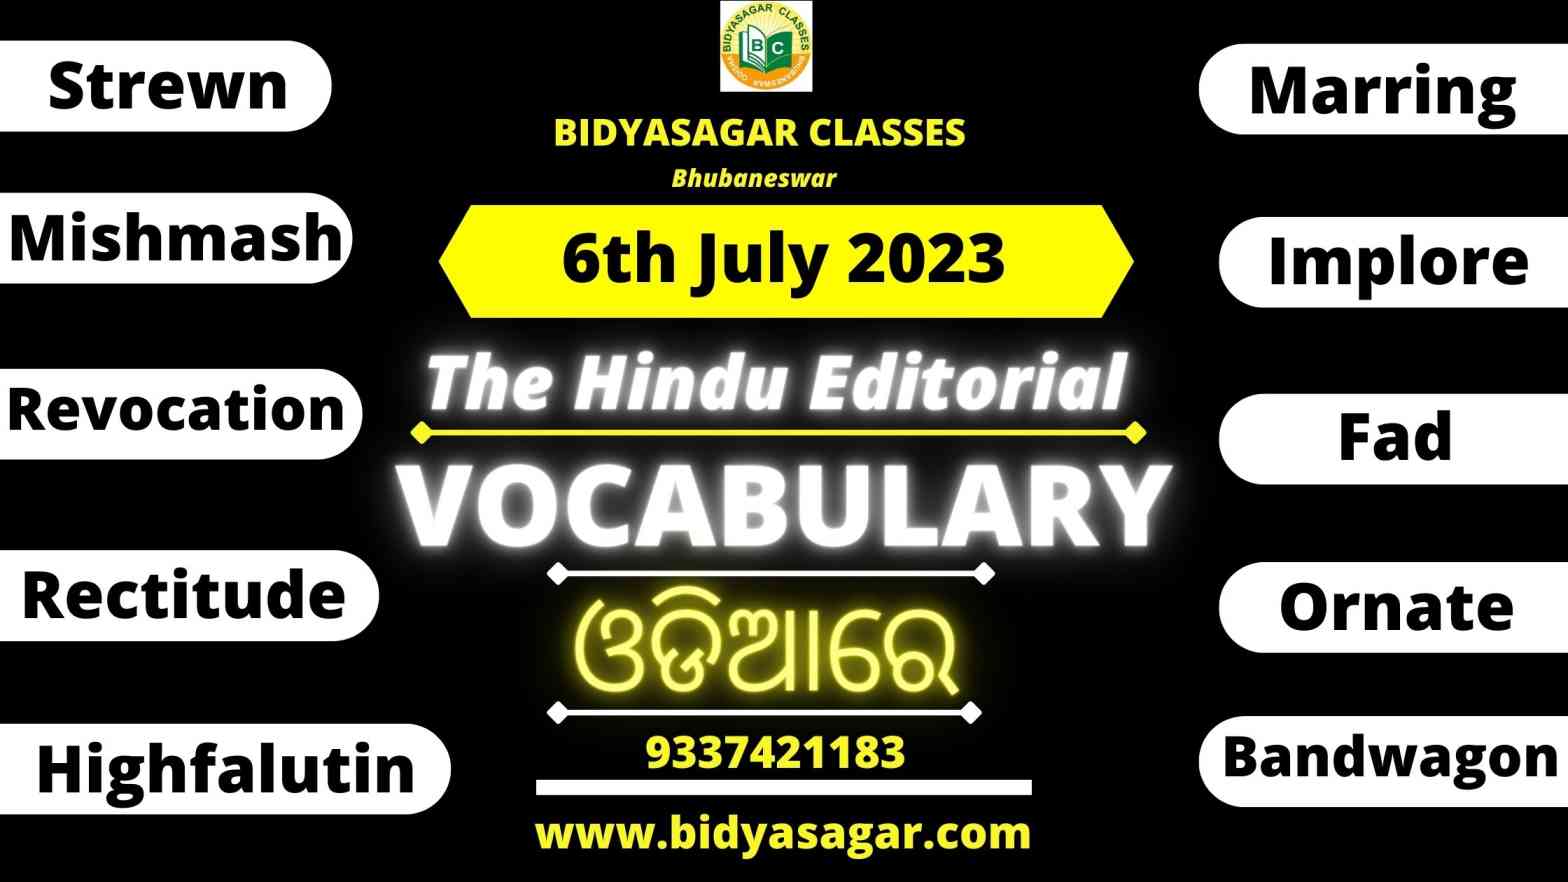 The Hindu Editorial Vocabulary of 6th July 2023